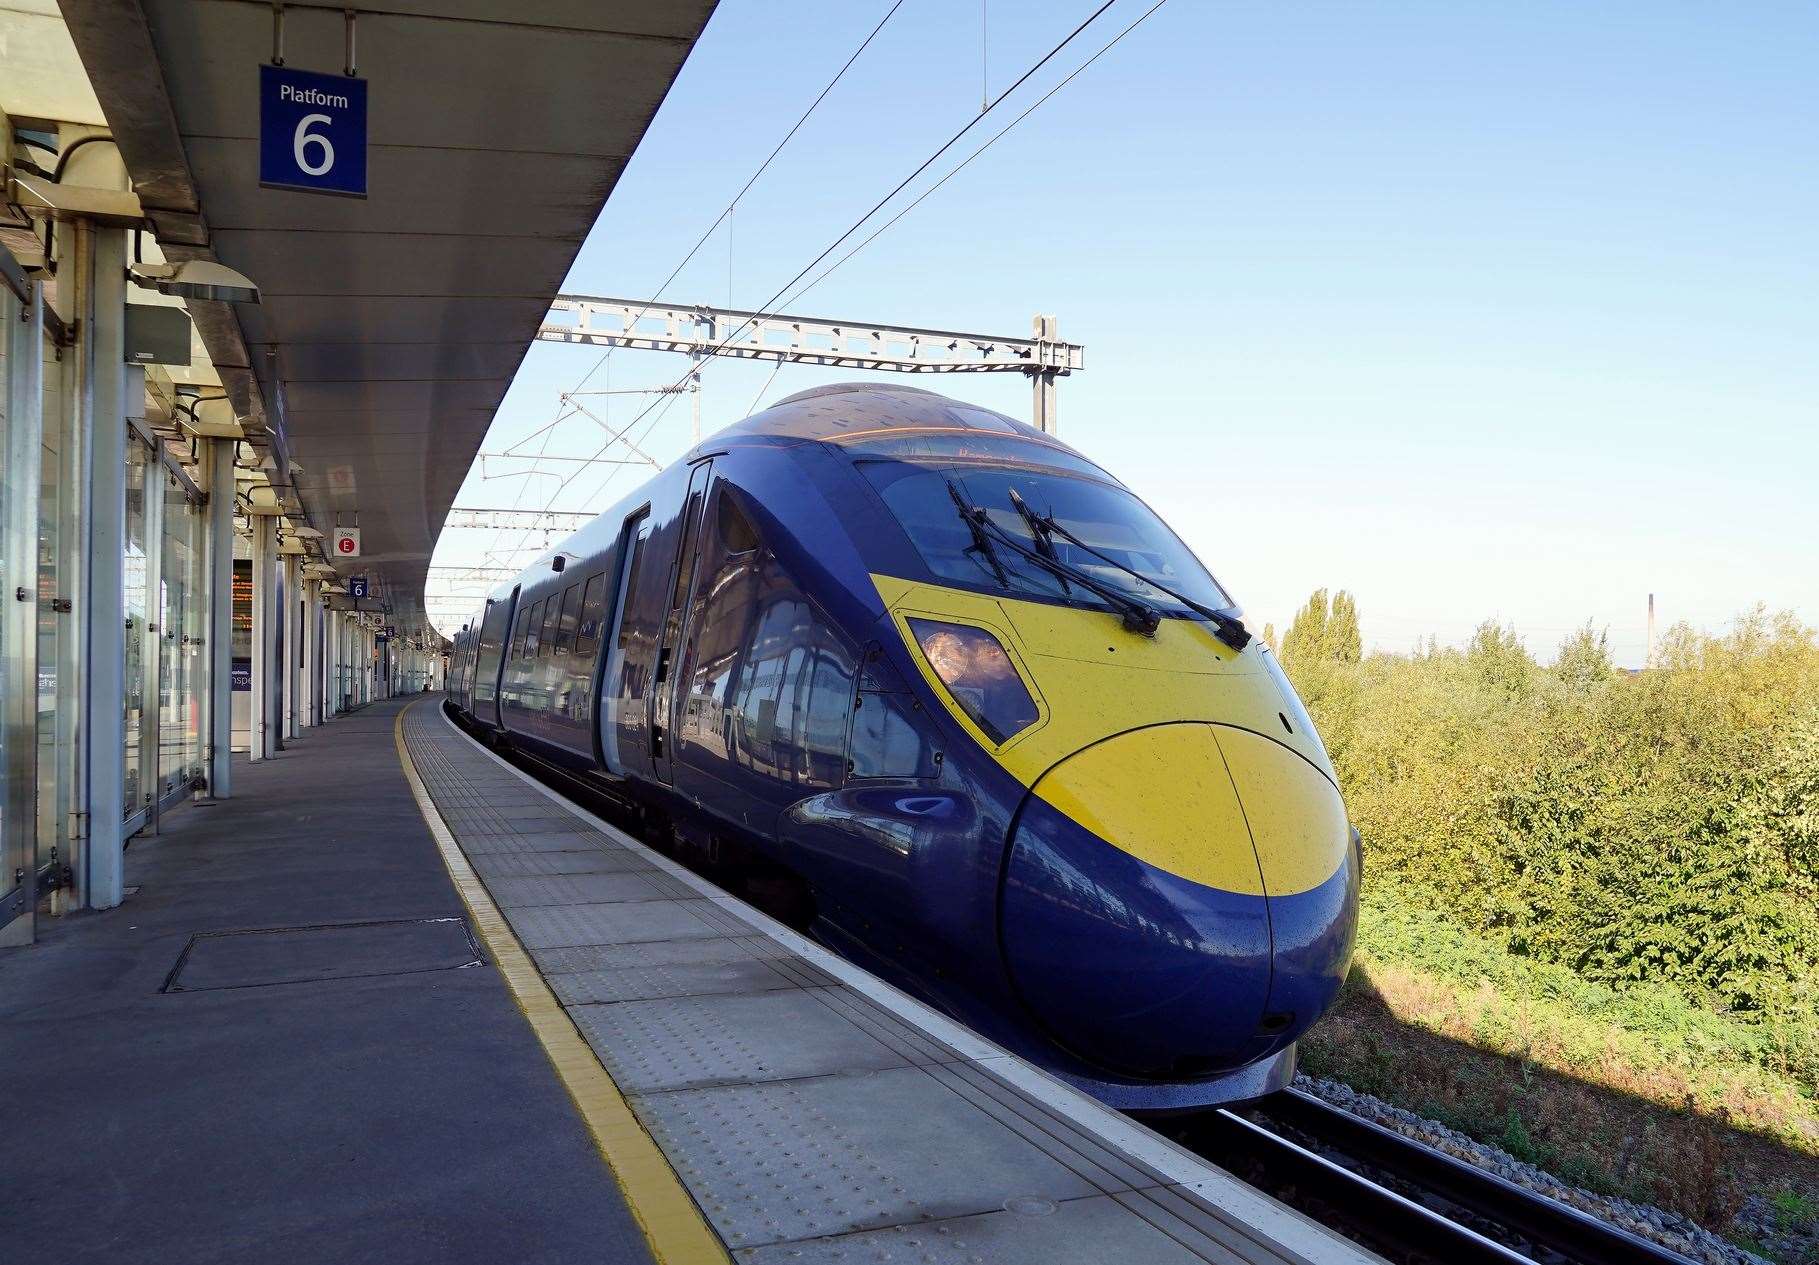 High-speed domestic services have been a success story - but Kent's international business aspirations have taken a heavy blow